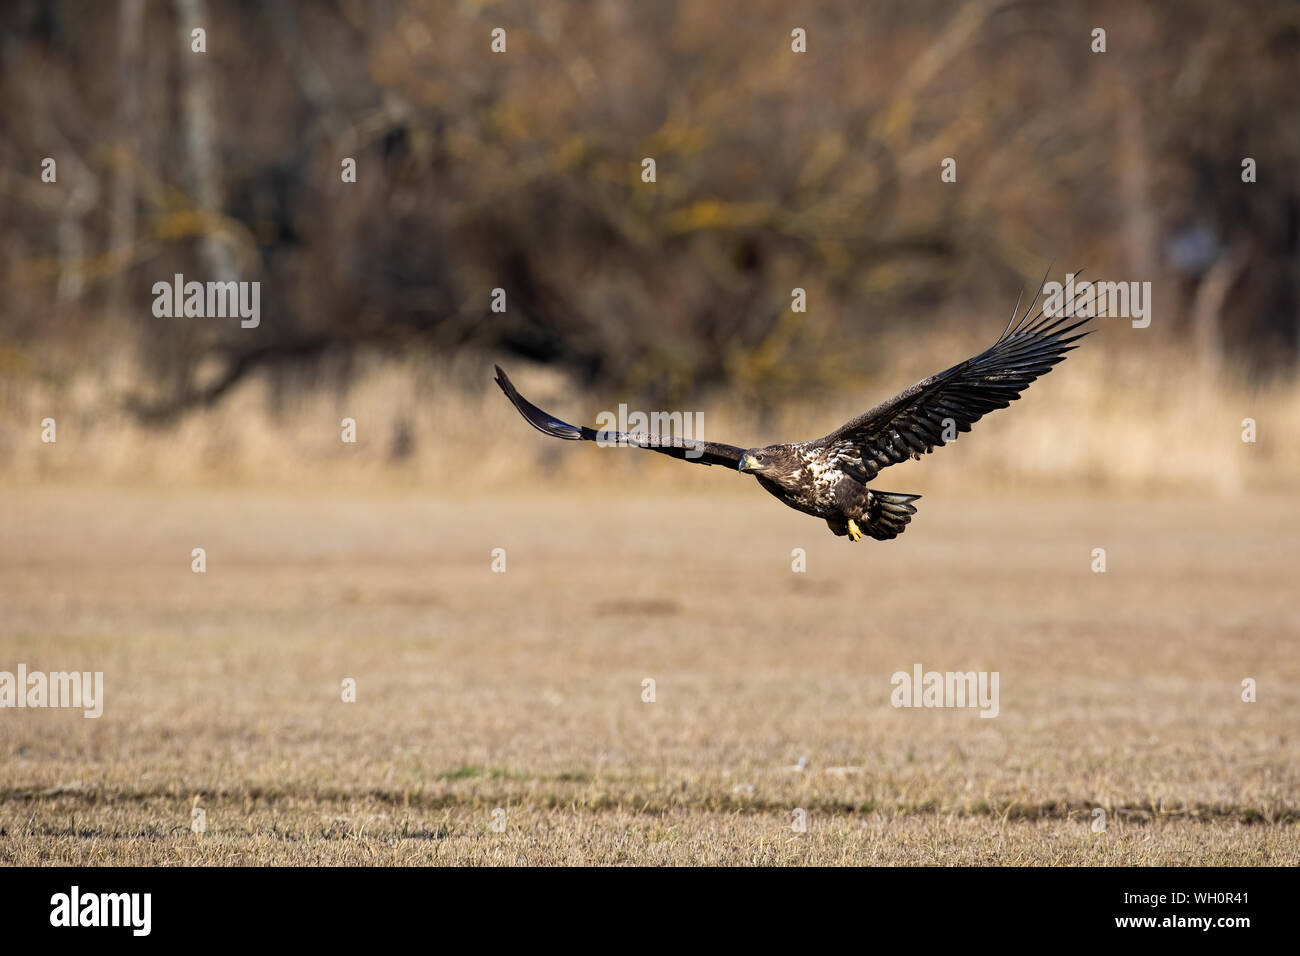 Juvenile white-tailed eagle flying low above ground Stock Photo